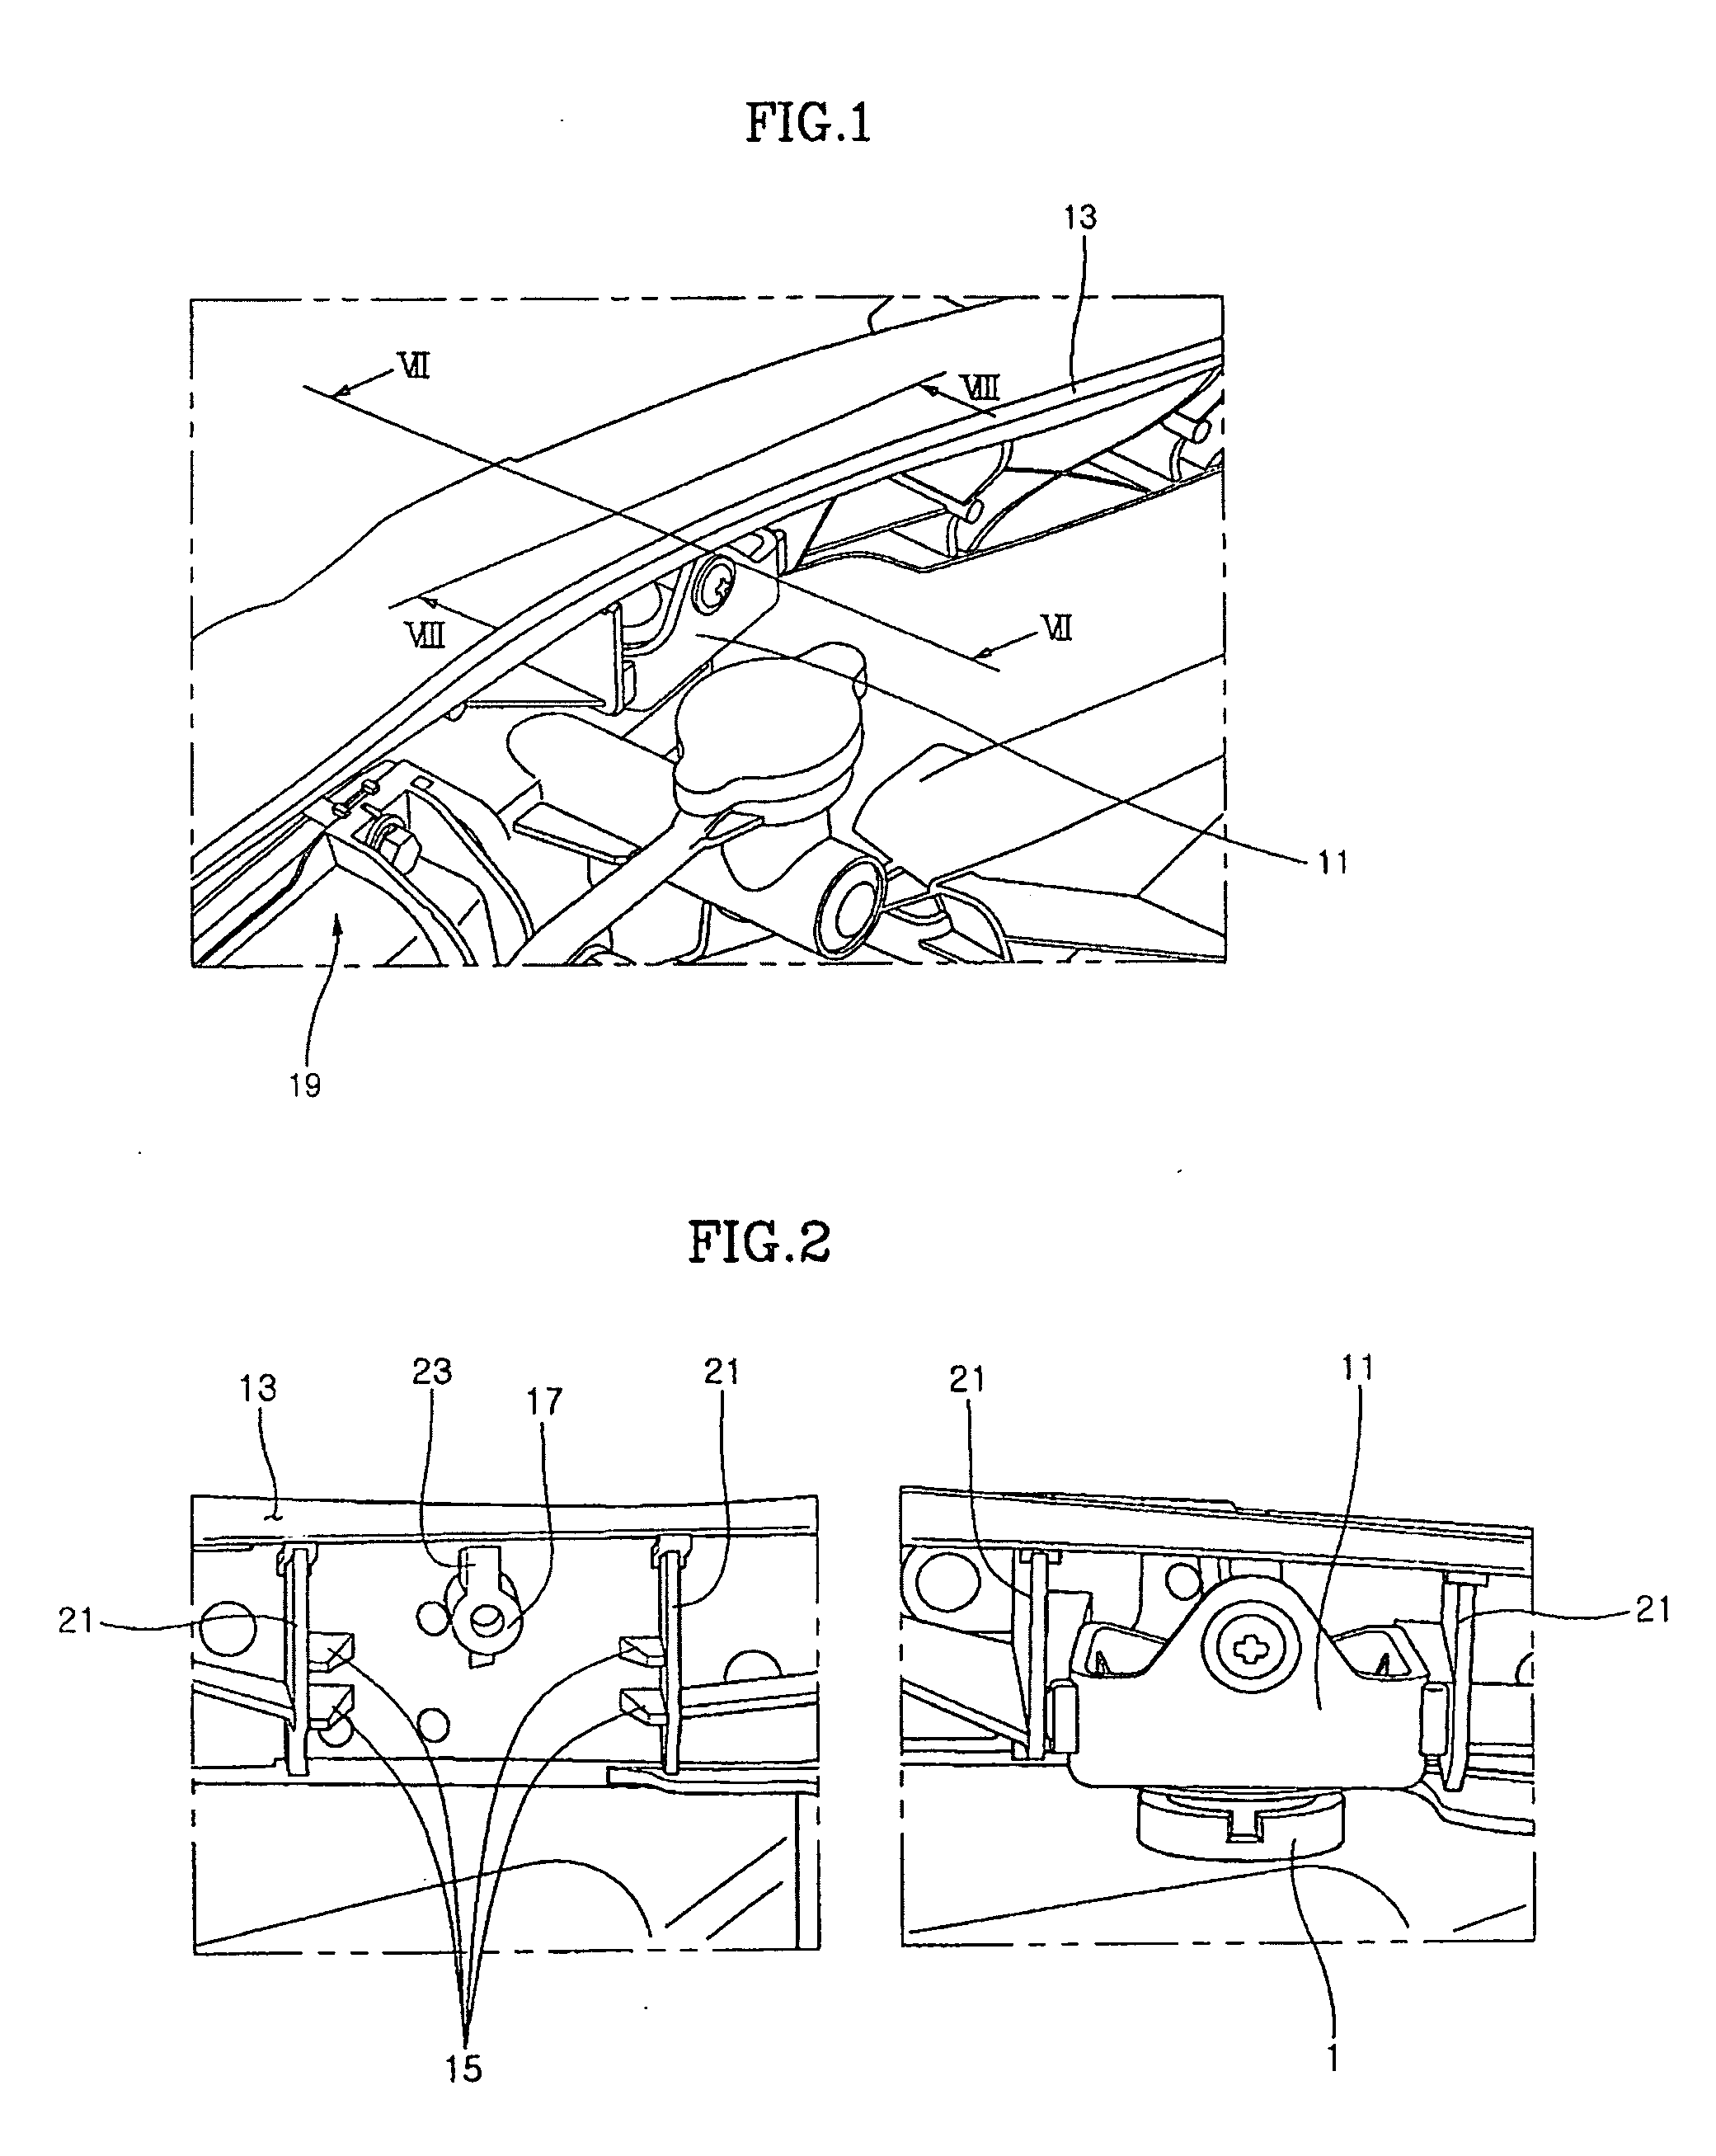 Structure for mounting radiator to front-end module carrier